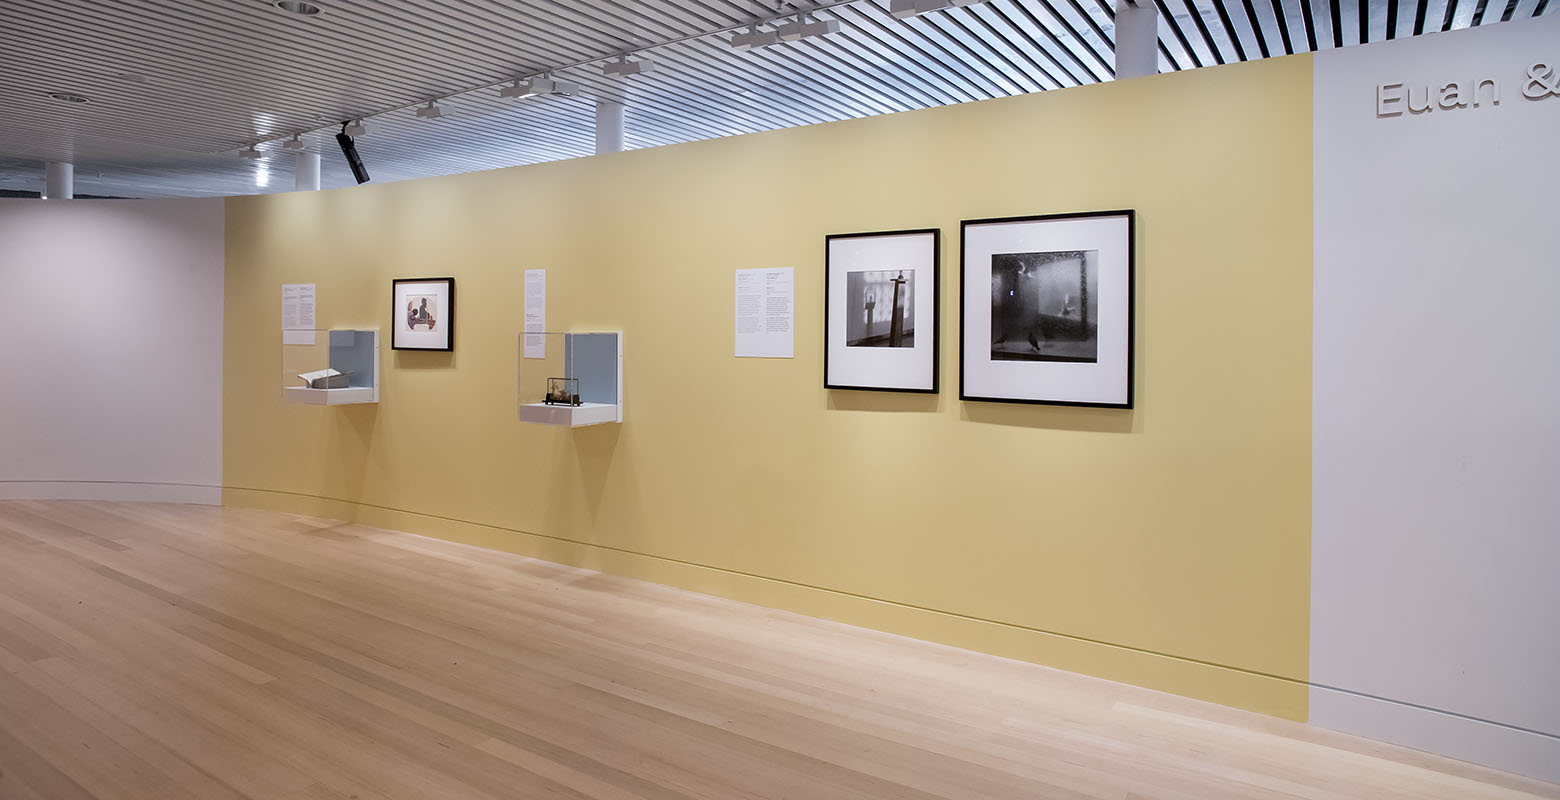 Two photographs are hung on a yellow wall, with a book and a wooden Chinese garden scene housed in display cases